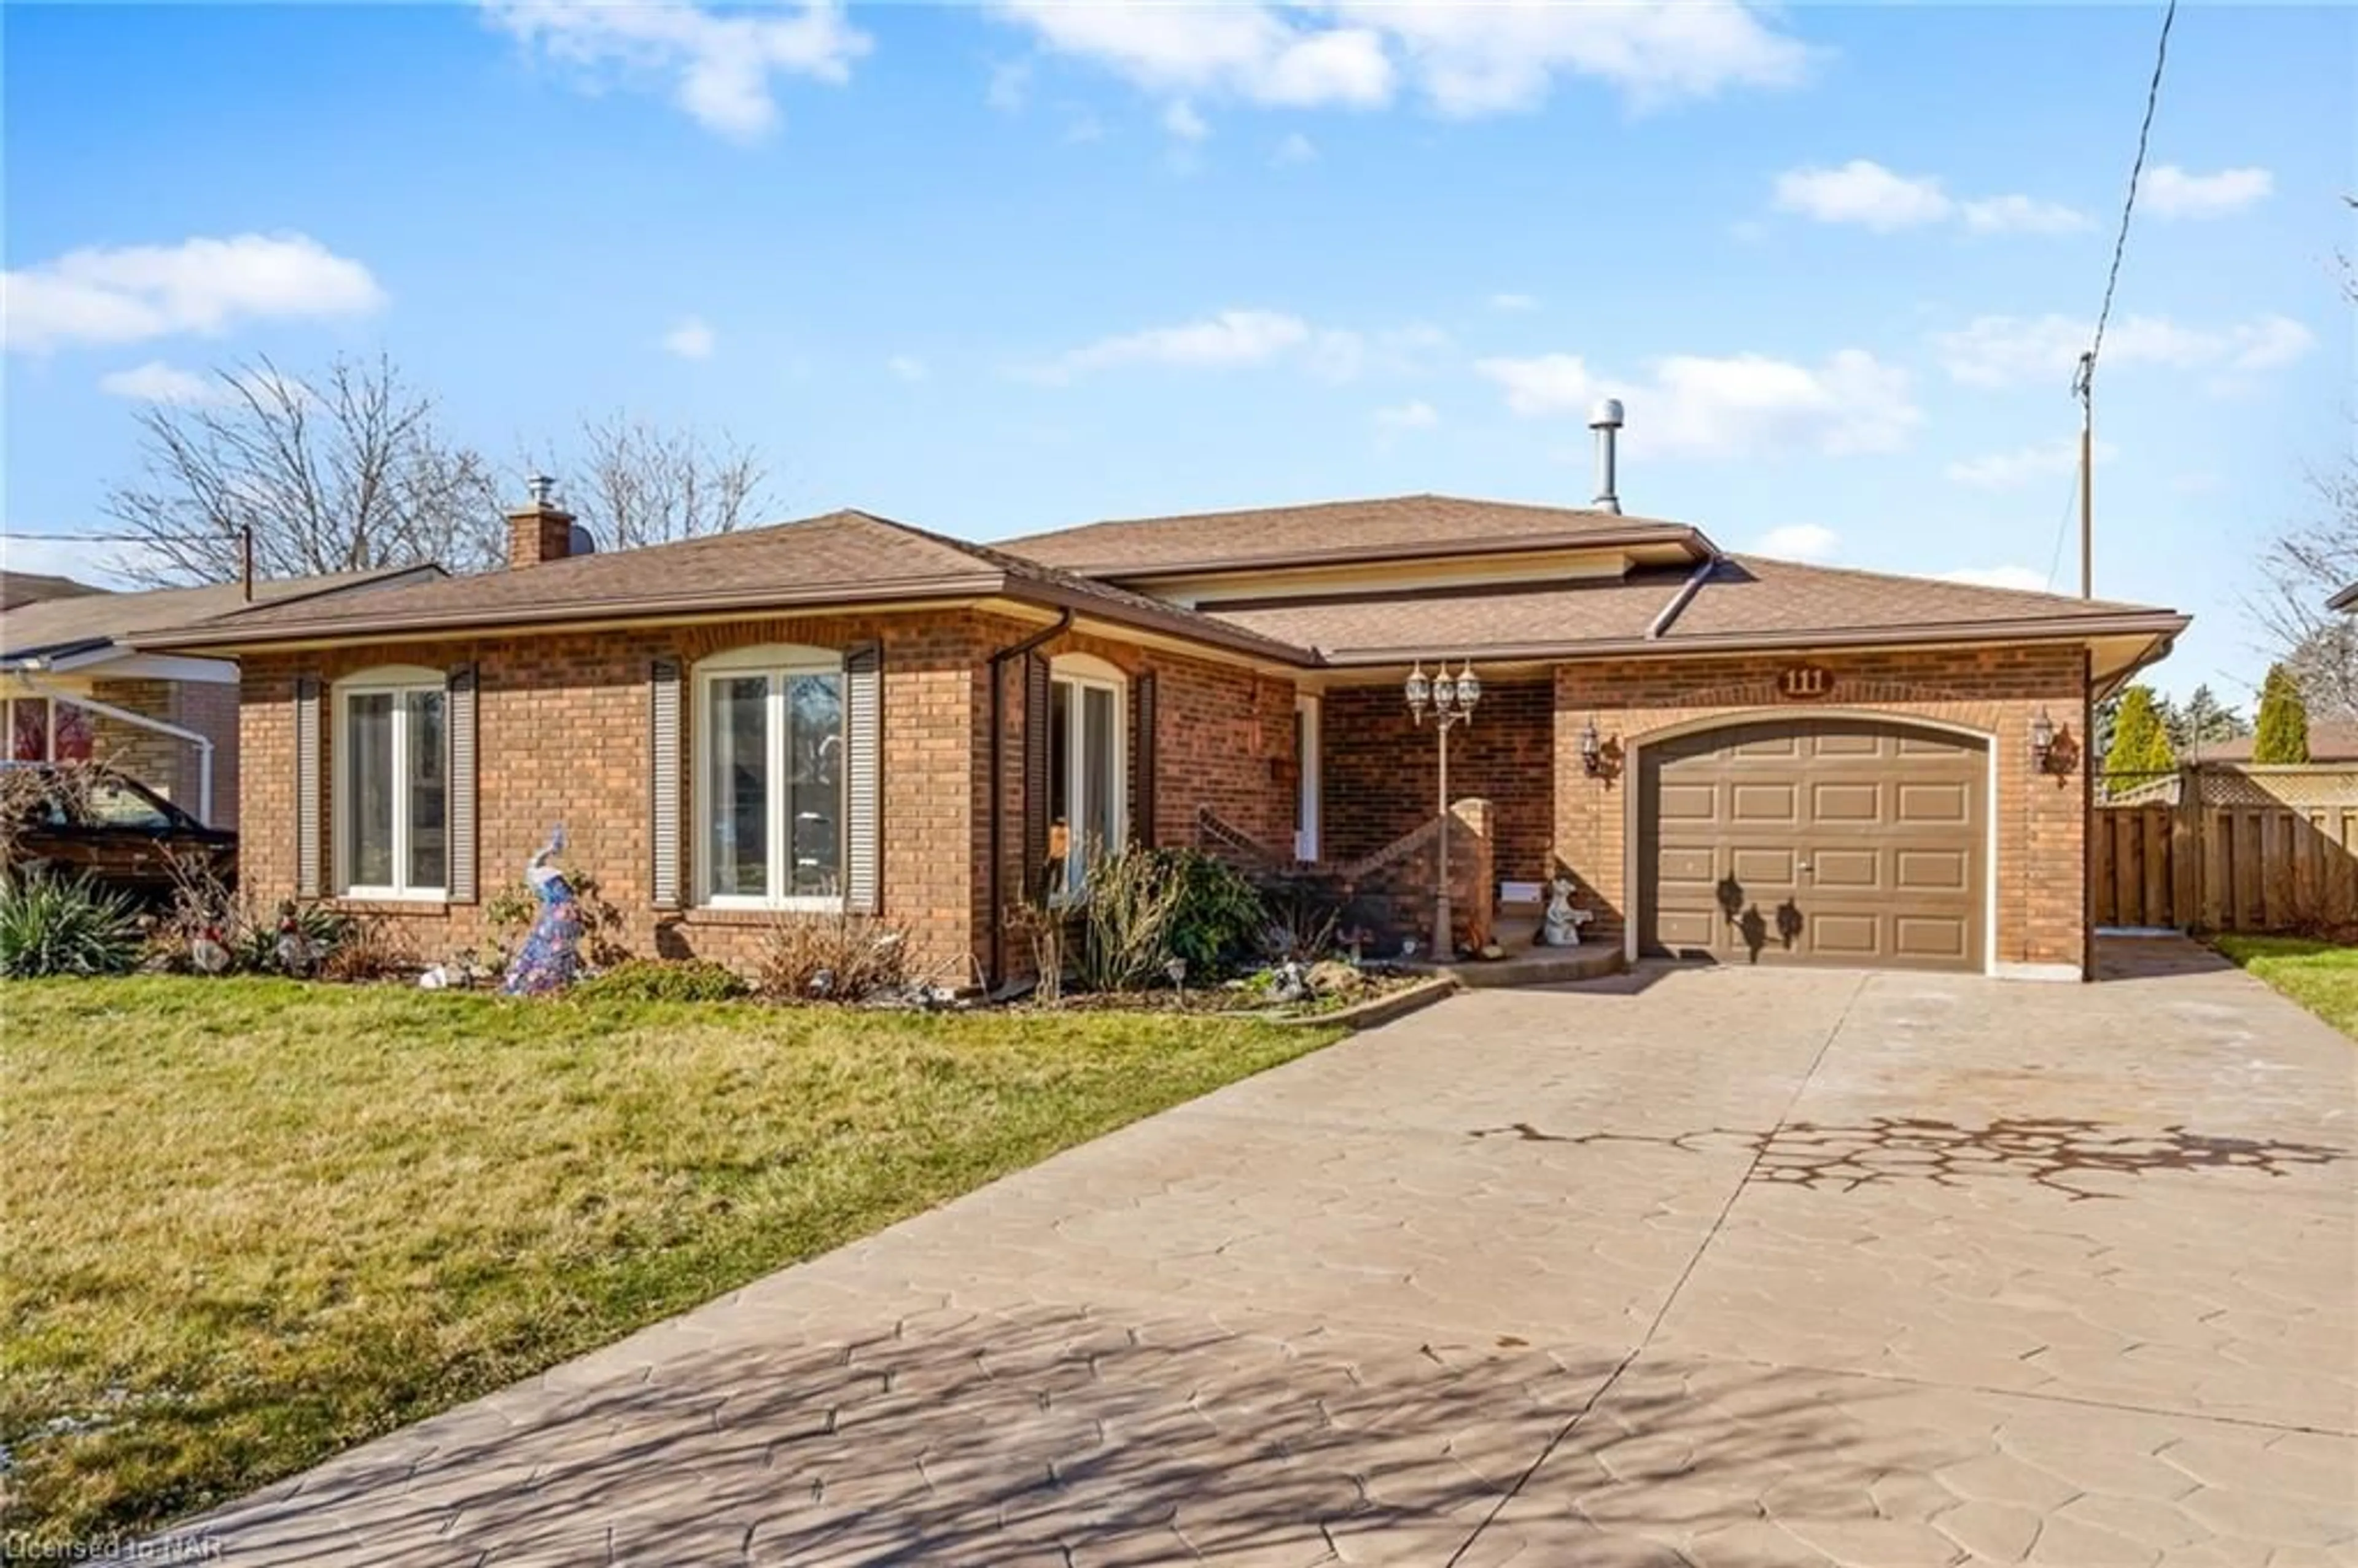 Home with brick exterior material for 111 Sherman Dr, St. Catharines Ontario L2N 2L7